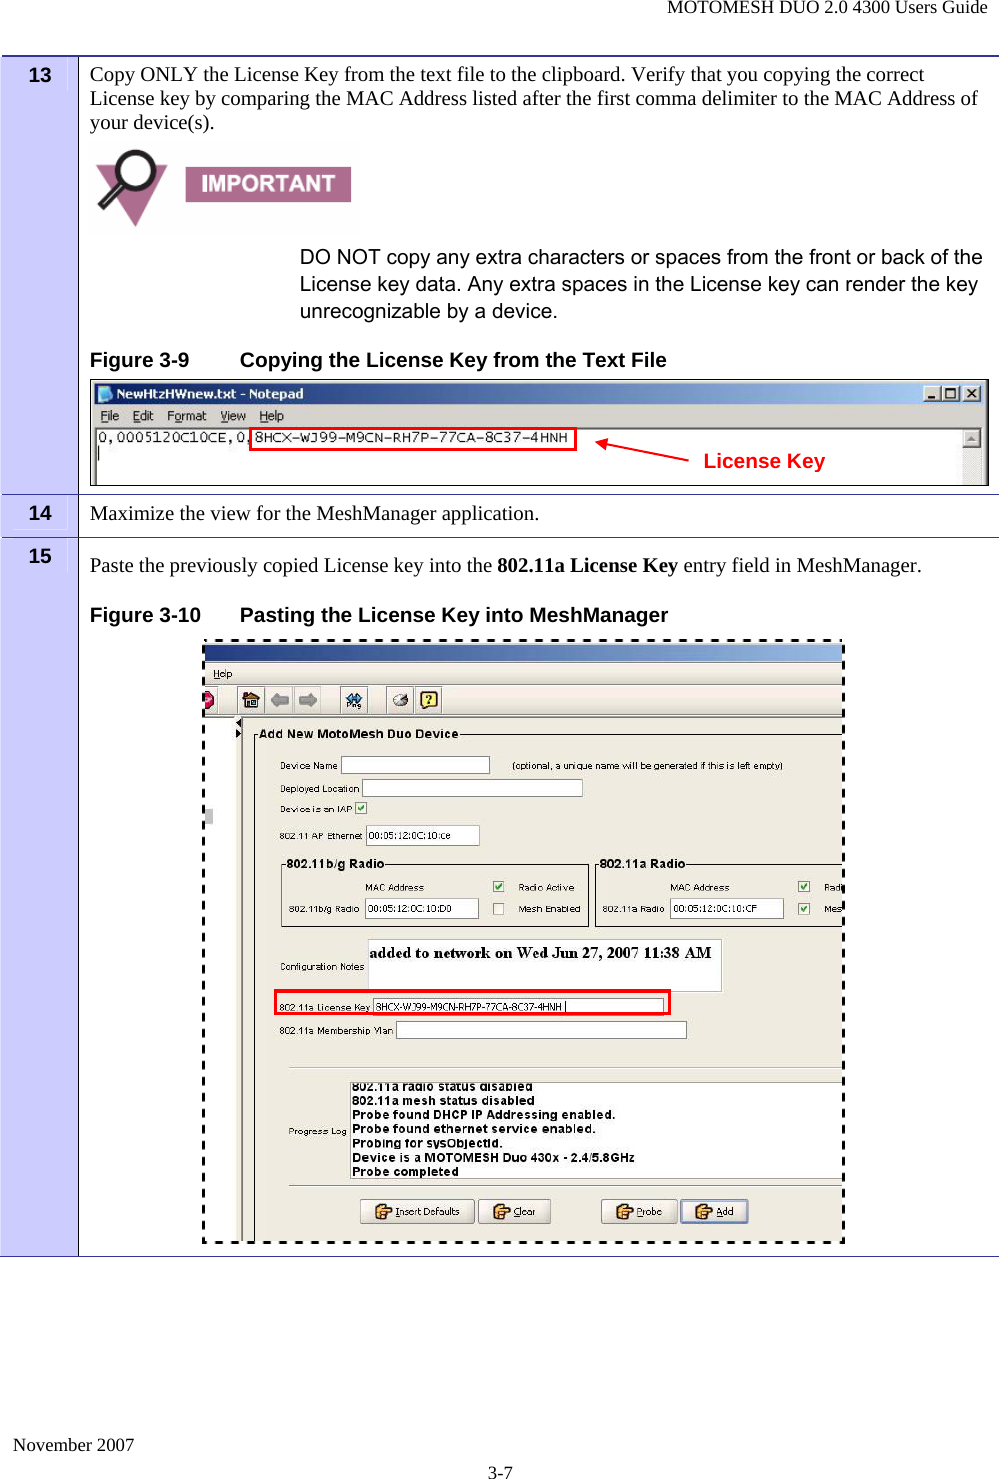 MOTOMESH DUO 2.0 4300 Users Guide November 2007 3-7 13  Copy ONLY the License Key from the text file to the clipboard. Verify that you copying the correct License key by comparing the MAC Address listed after the first comma delimiter to the MAC Address of your device(s).   DO NOT copy any extra characters or spaces from the front or back of the License key data. Any extra spaces in the License key can render the key unrecognizable by a device. Figure 3-9  Copying the License Key from the Text File 14  Maximize the view for the MeshManager application.  15  Paste the previously copied License key into the 802.11a License Key entry field in MeshManager.  Figure 3-10  Pasting the License Key into MeshManager  License Key 